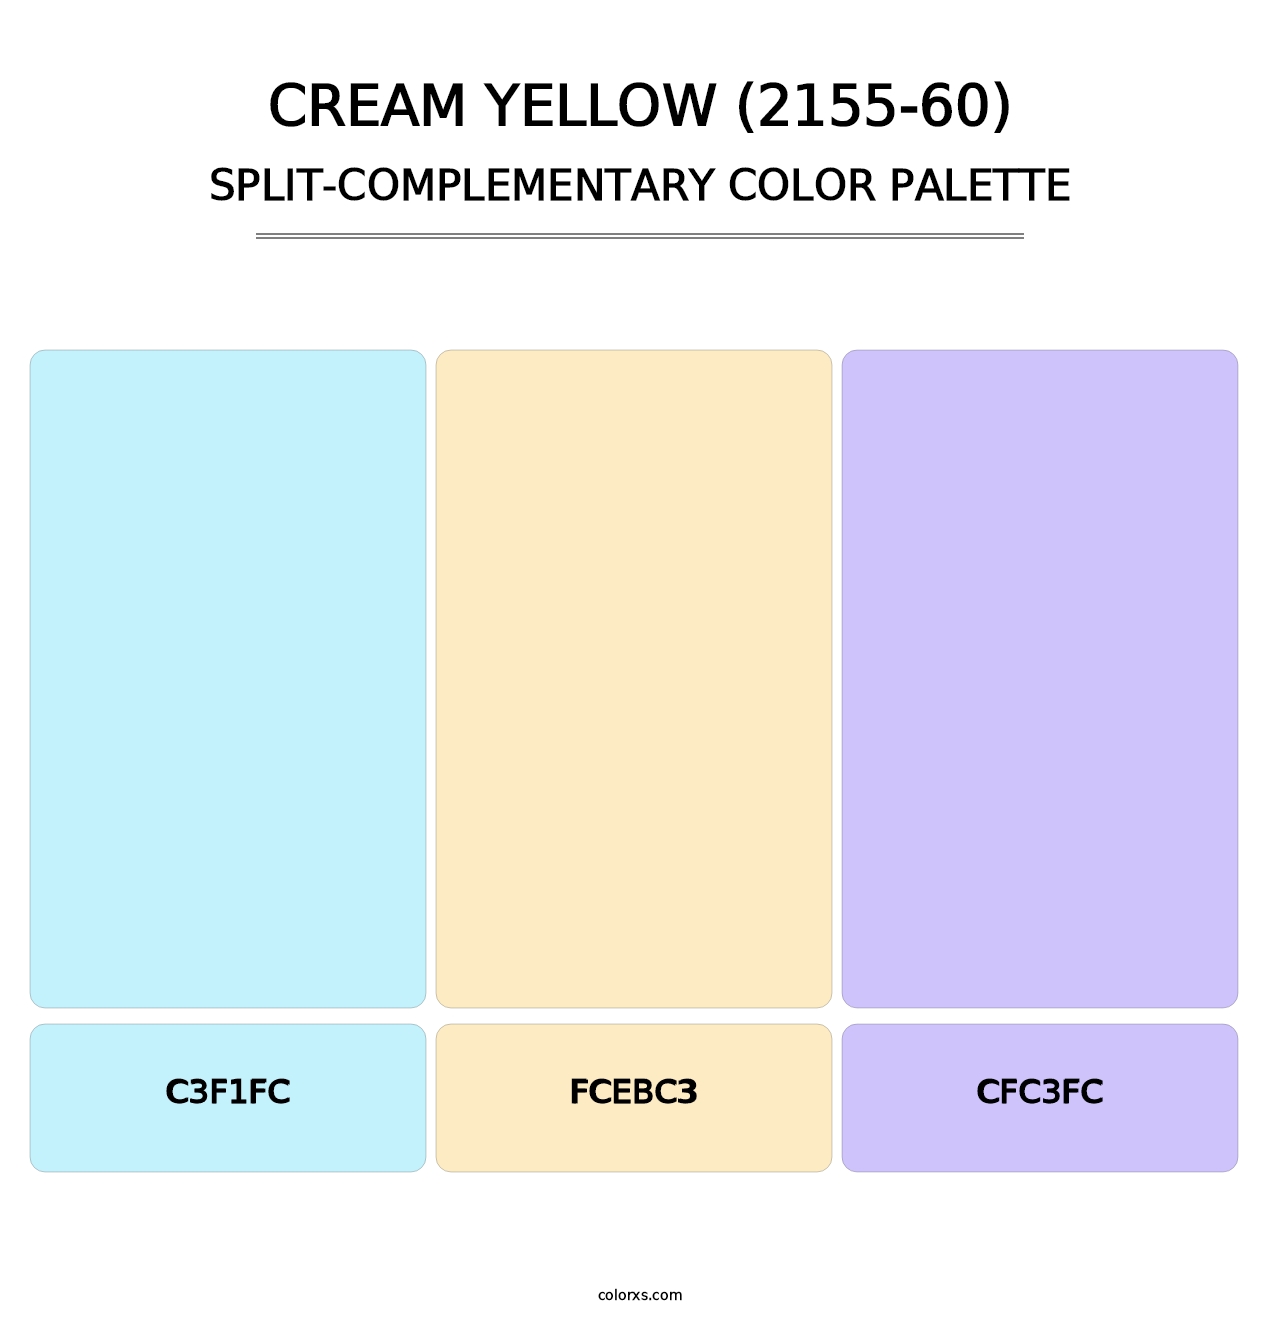 Cream Yellow (2155-60) - Split-Complementary Color Palette